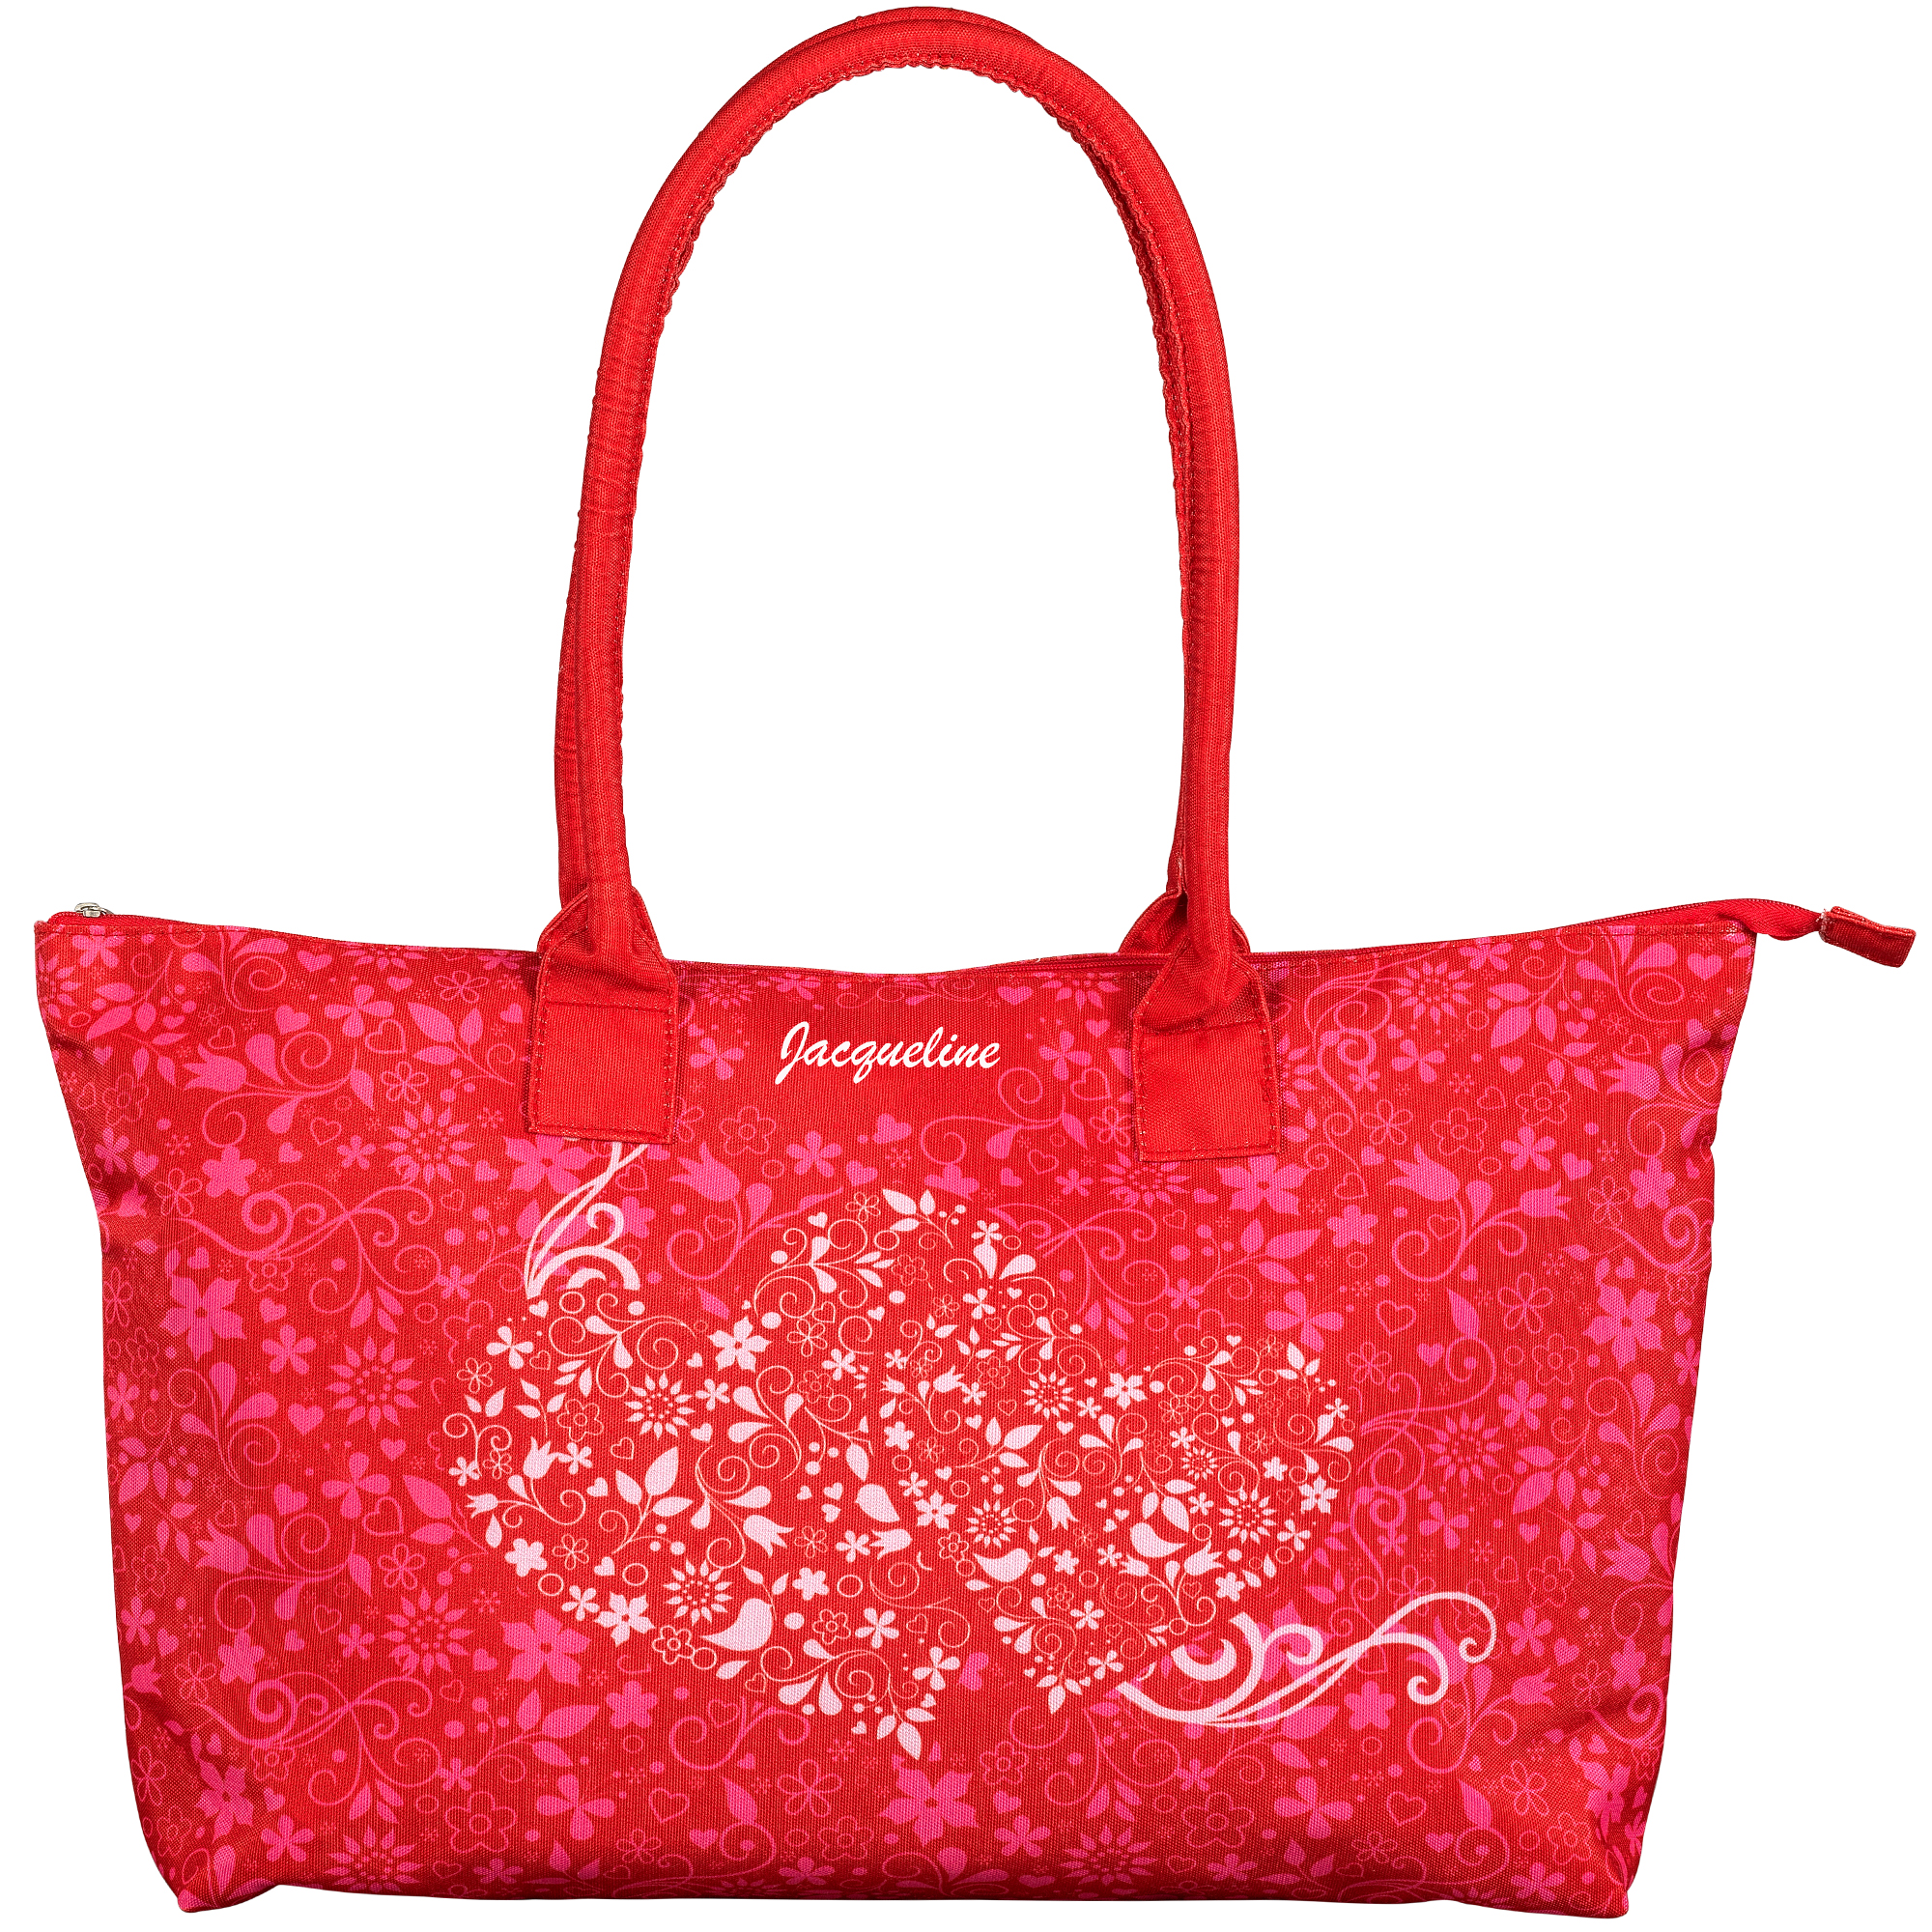 Simply You Personalized Totes 10840 0011 a january